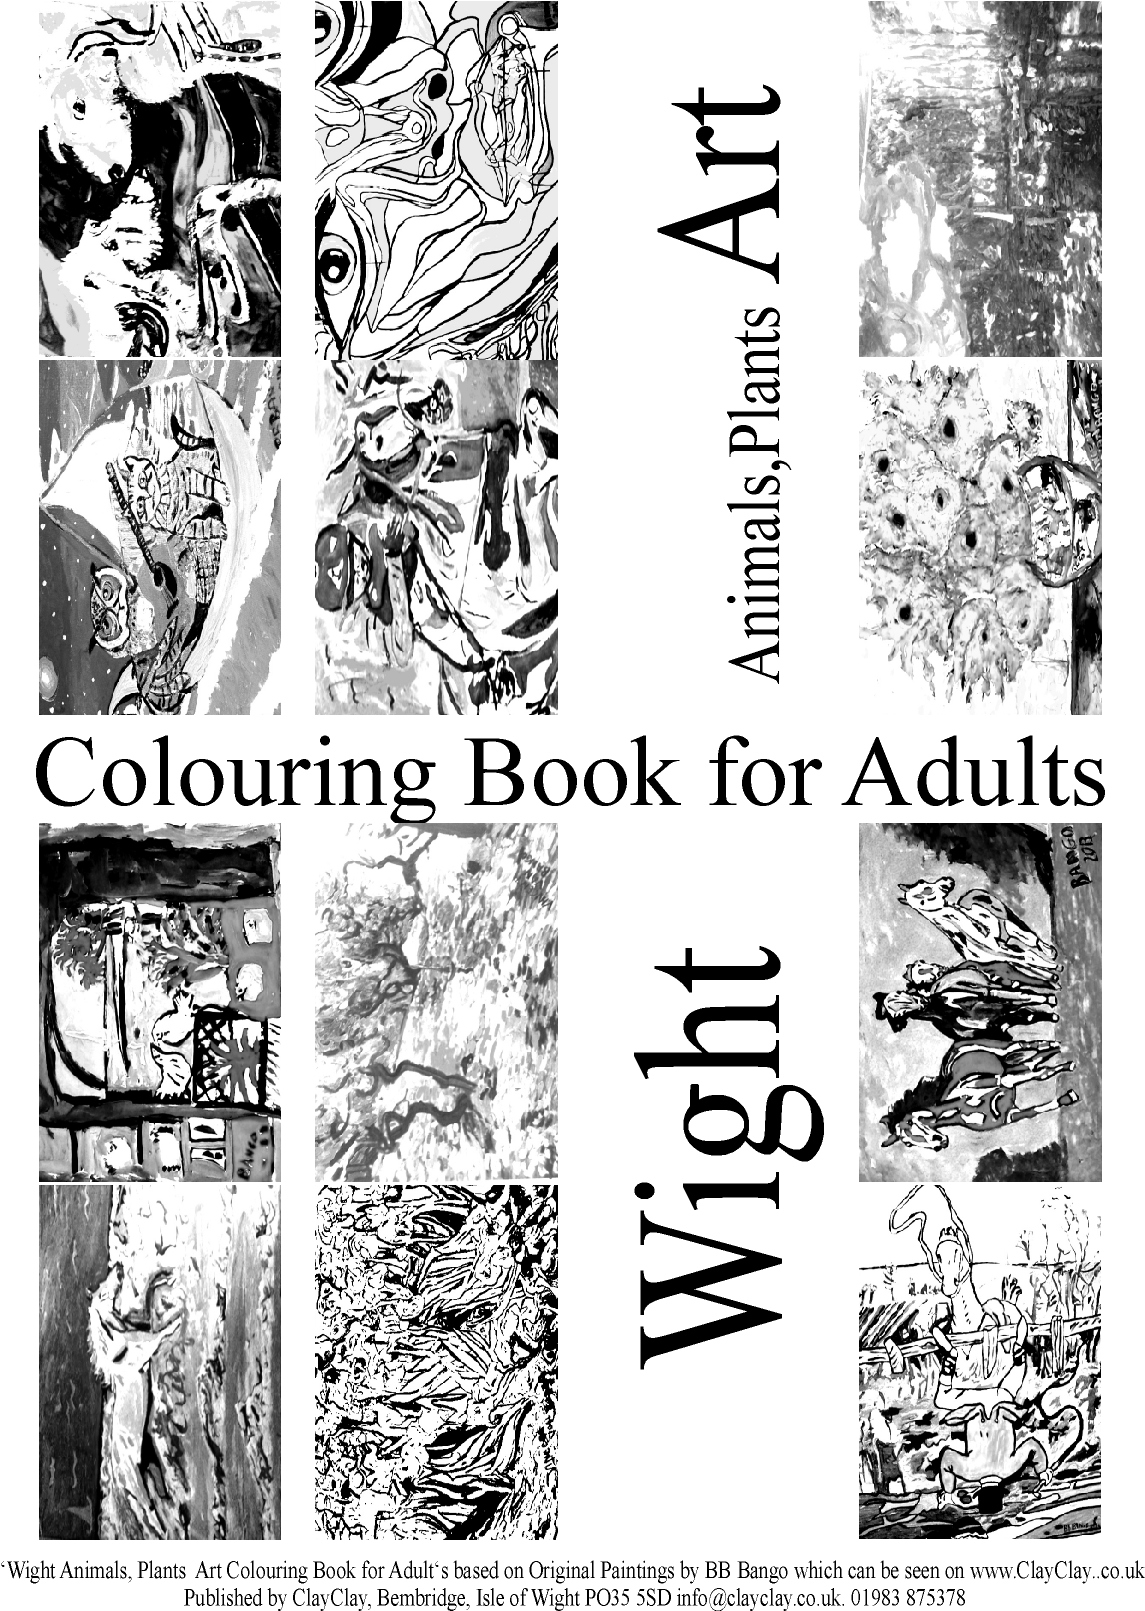 Animals and Plants. 'Coloring (colouring) books for Adults' 12 paintings per book various themes. Use your own crayons, pastels, fibre tipped pens, ink, watercolour, acrylic or oil paints. £5 per book plus £2.50 postage and packing. E mail us your requirements